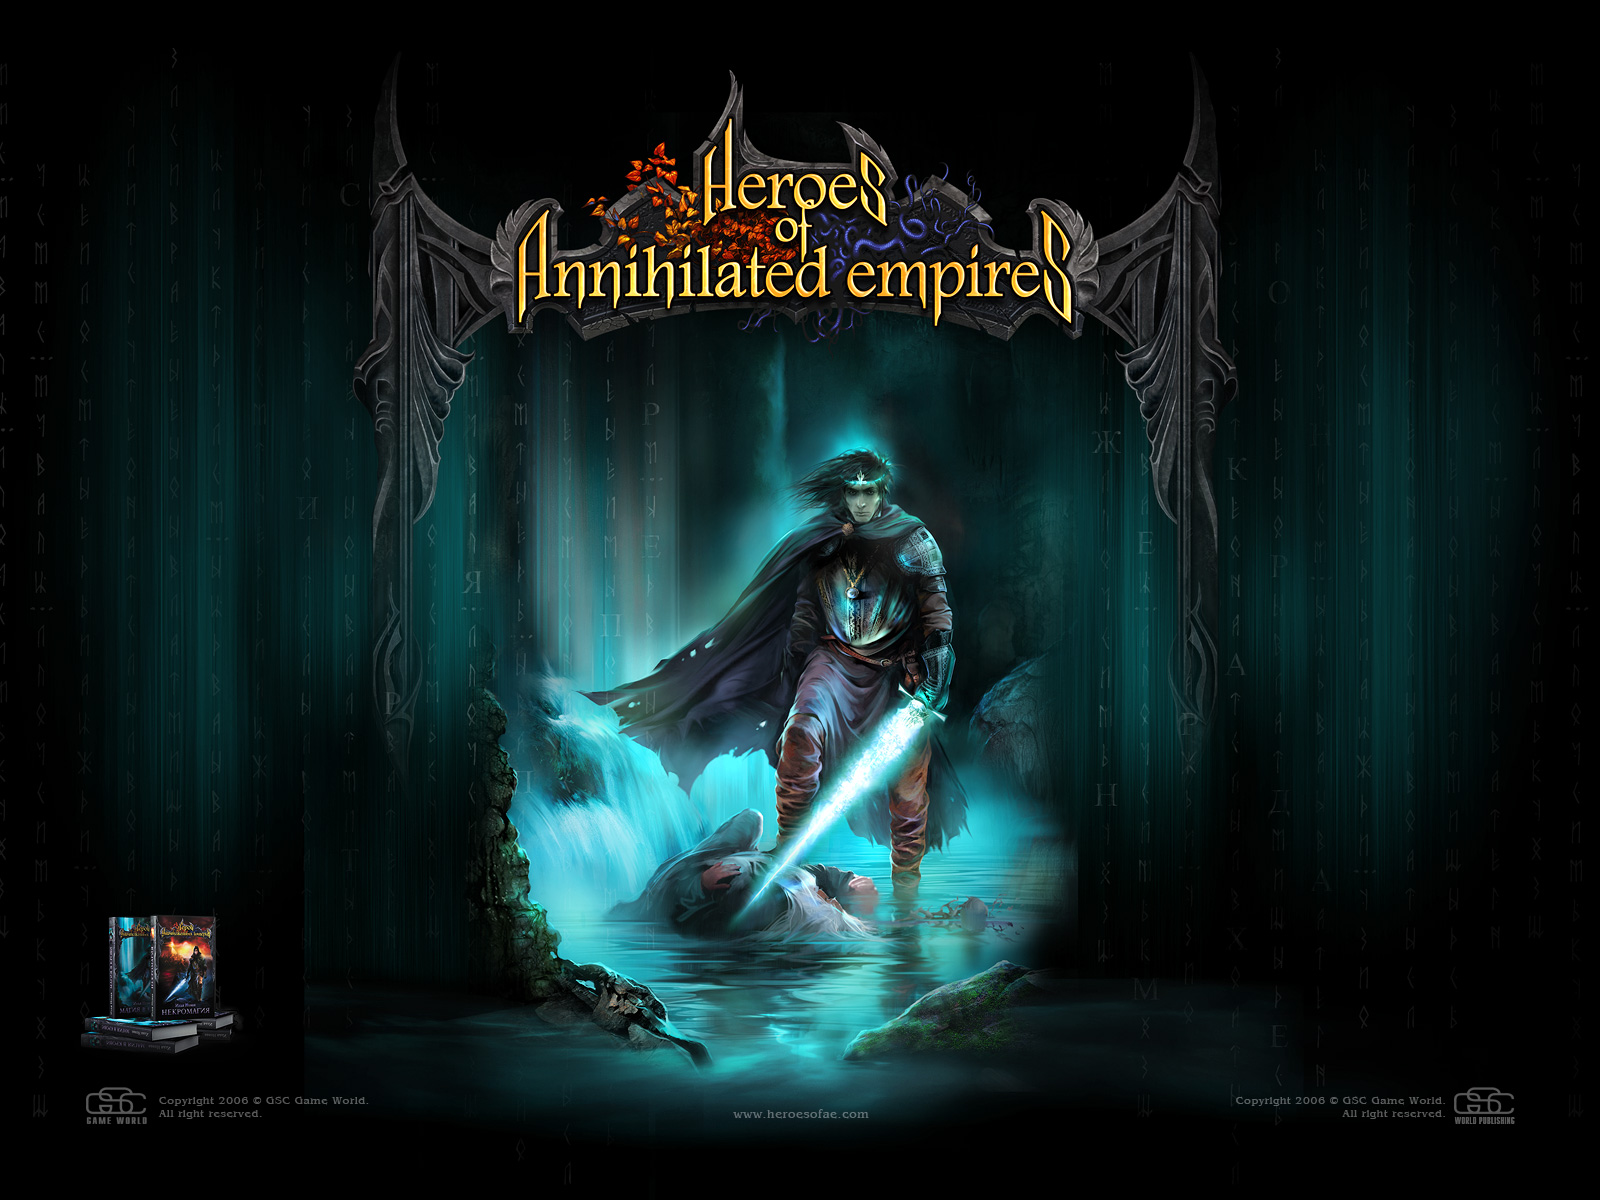 Heroes_of_annihilated_empires_01_1600x1200.jpg